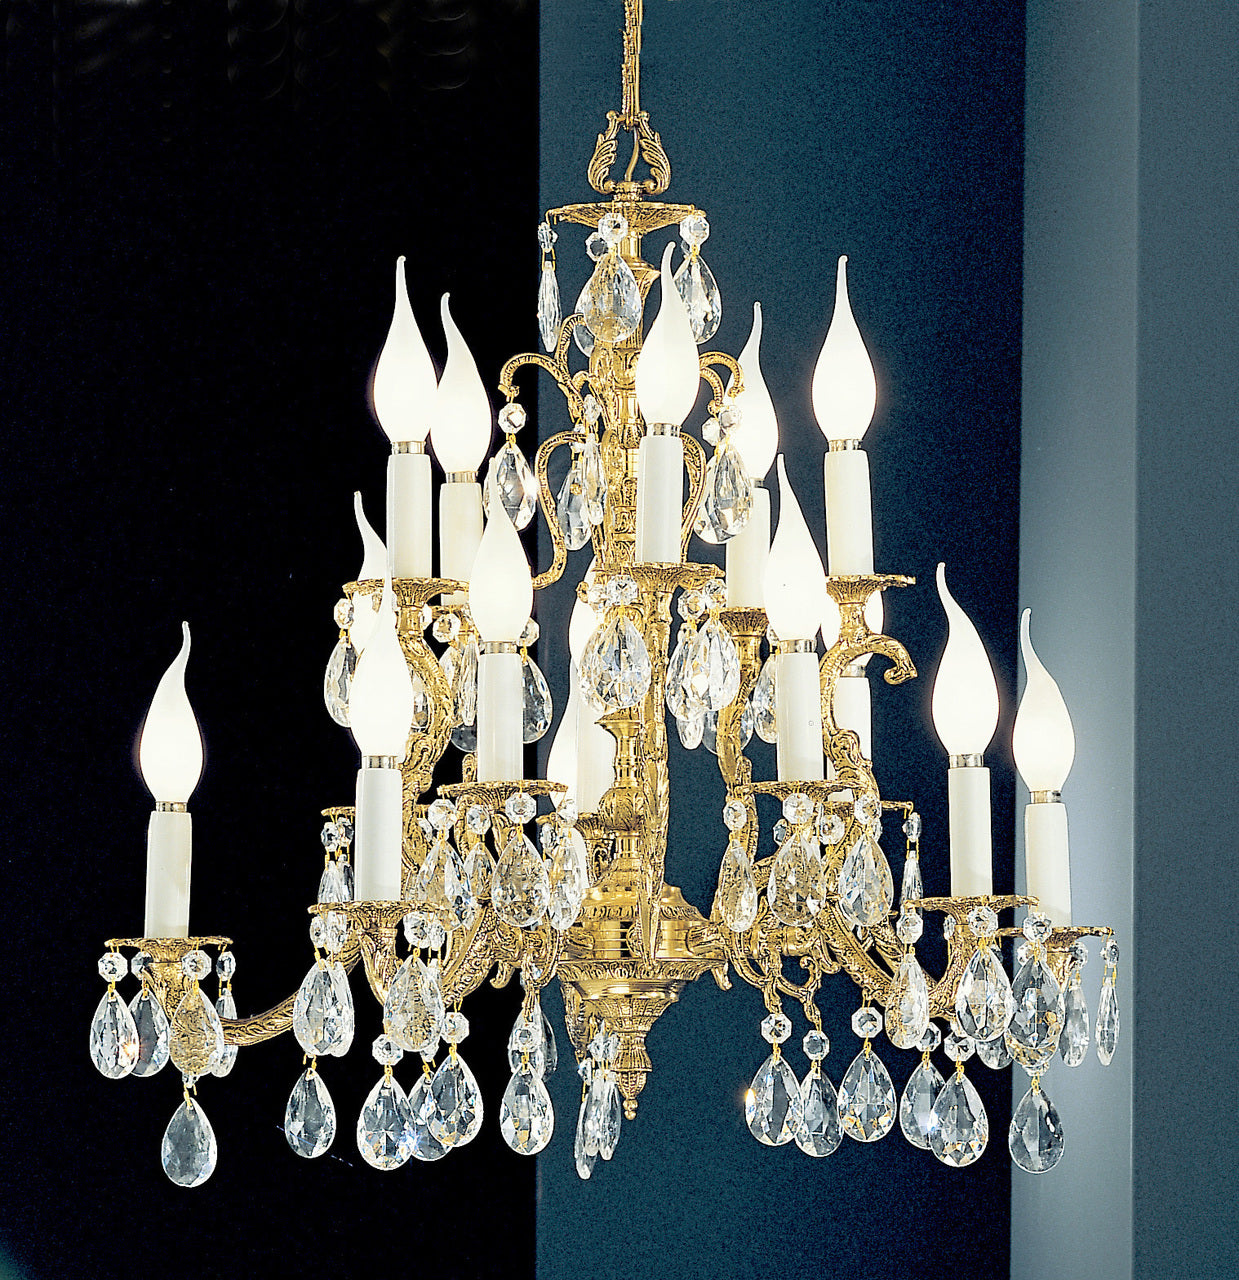 Classic Lighting 5515 MS I Barcelona Crystal/Cast Brass Chandelier in Millennium Silver (Imported from Spain)